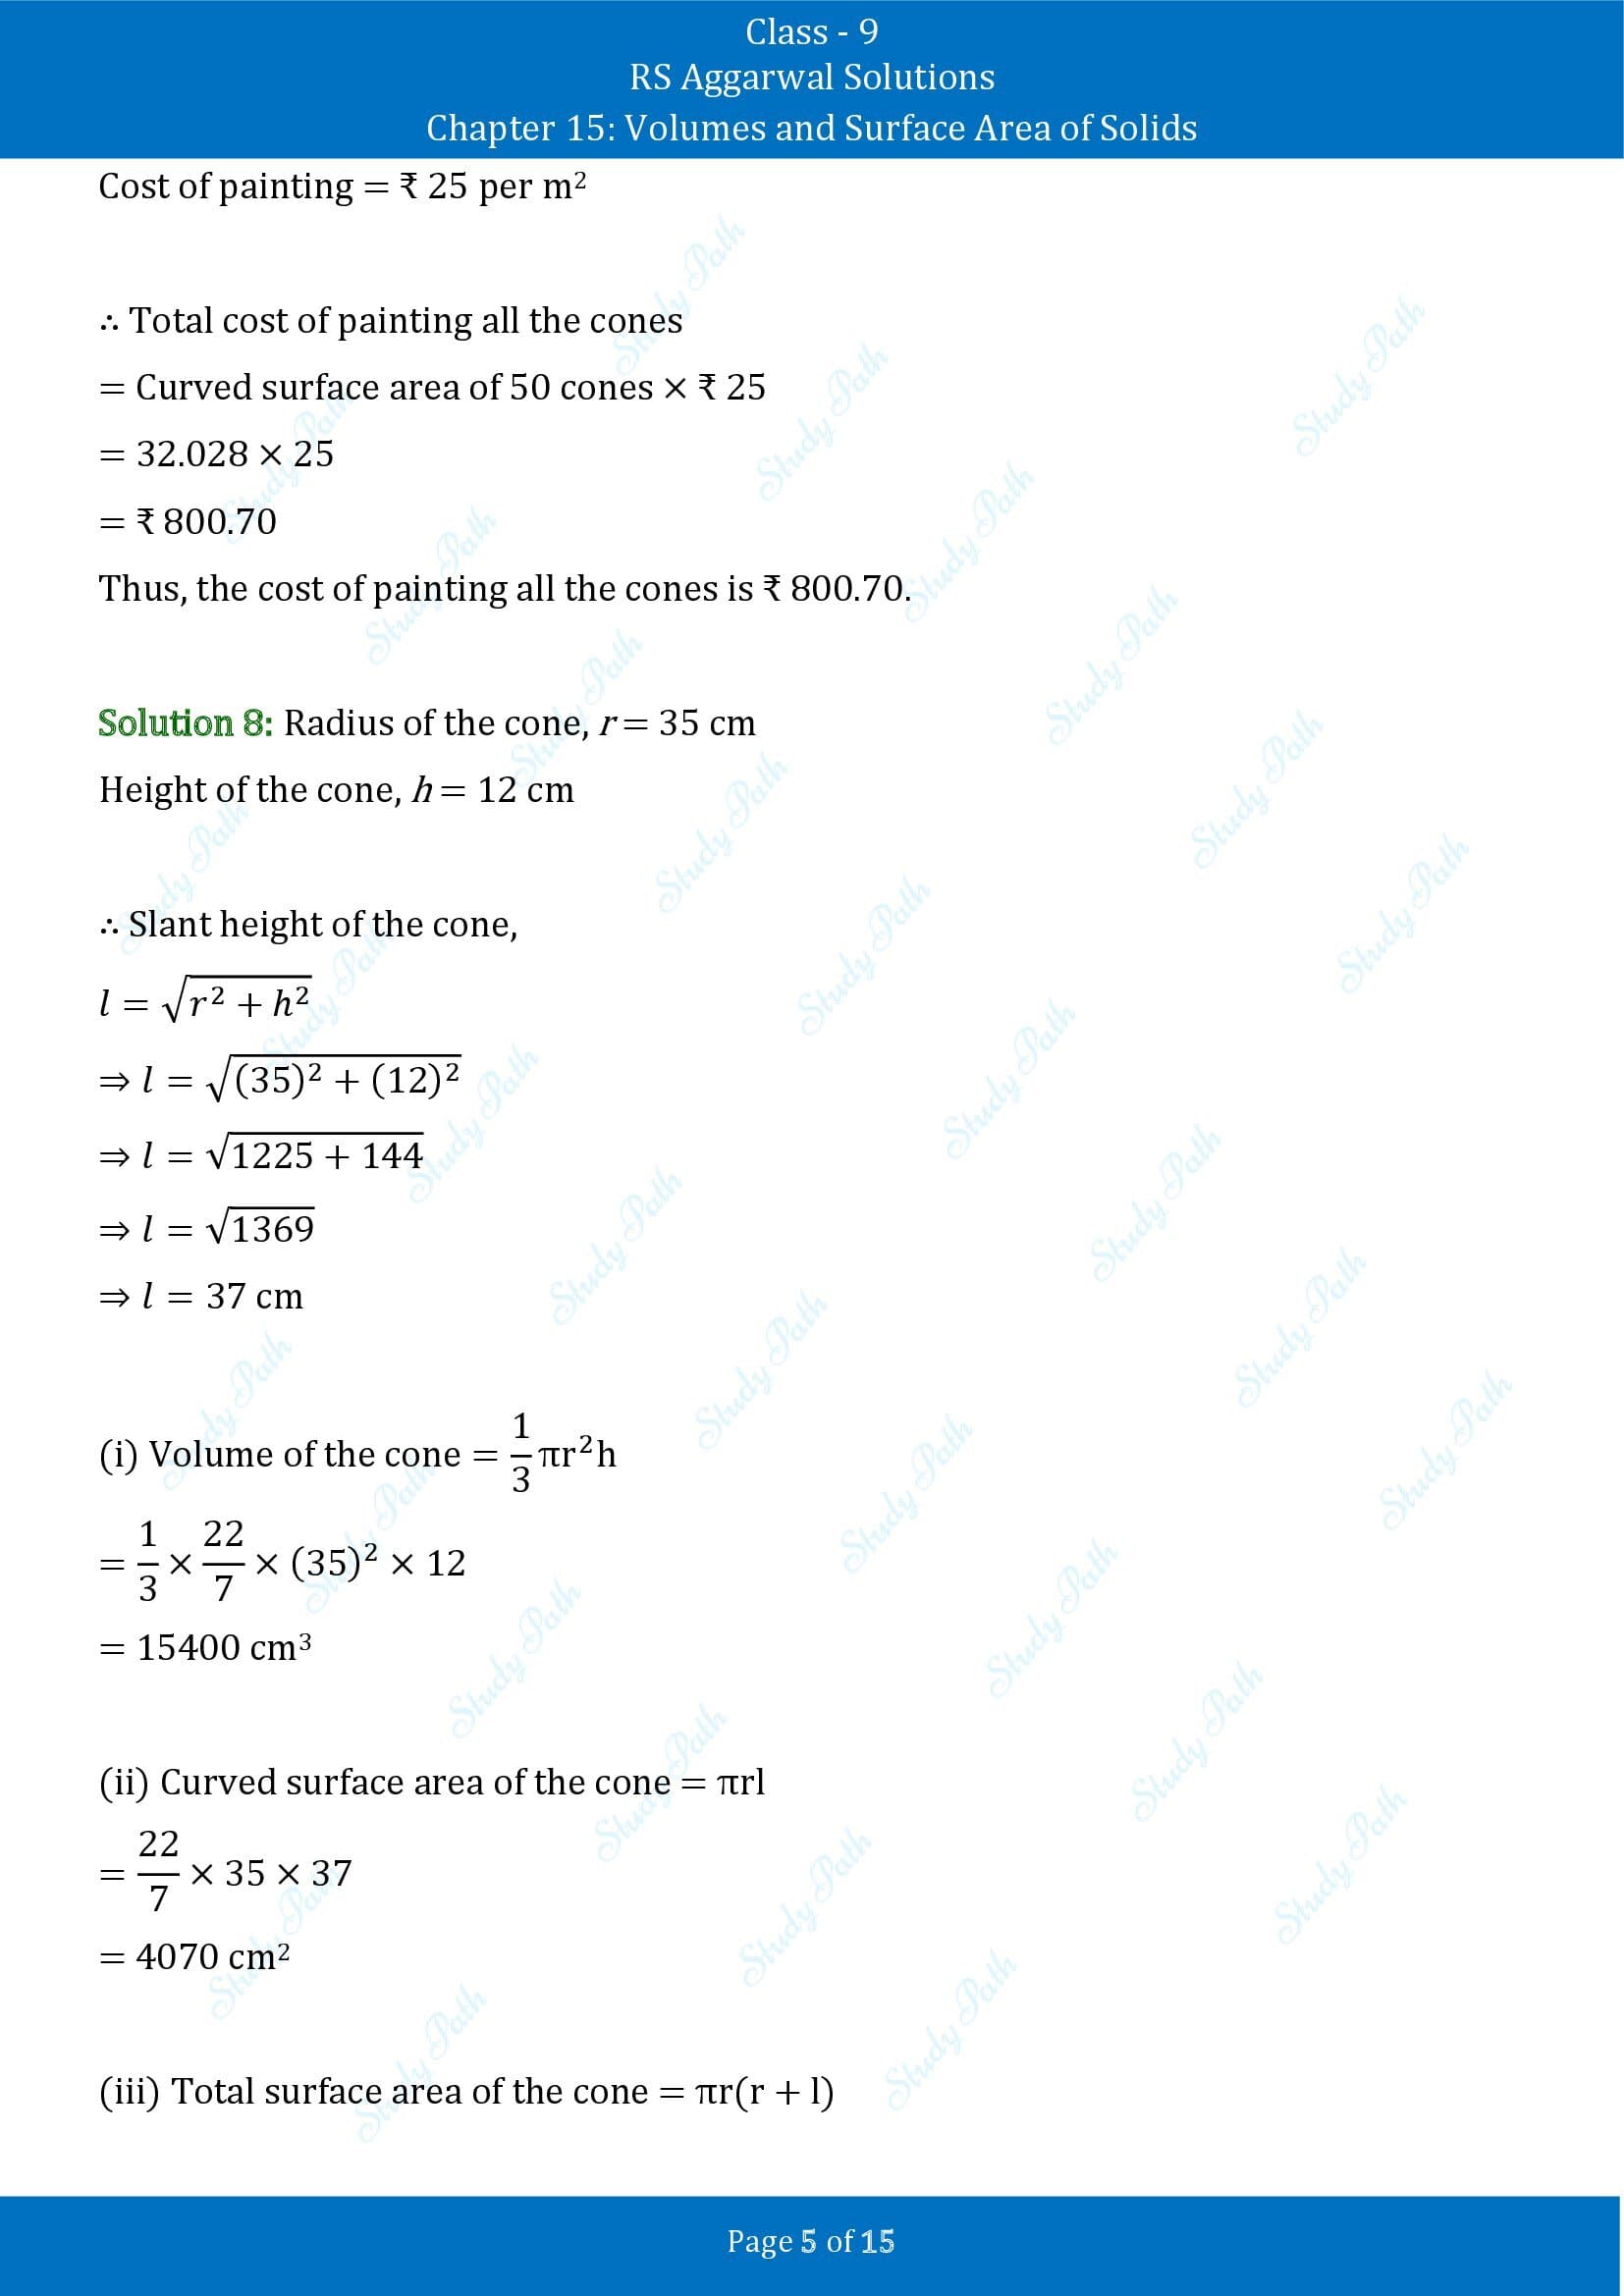 RS Aggarwal Solutions Class 9 Chapter 15 Volumes and Surface Area of Solids Exercise 15C 00005